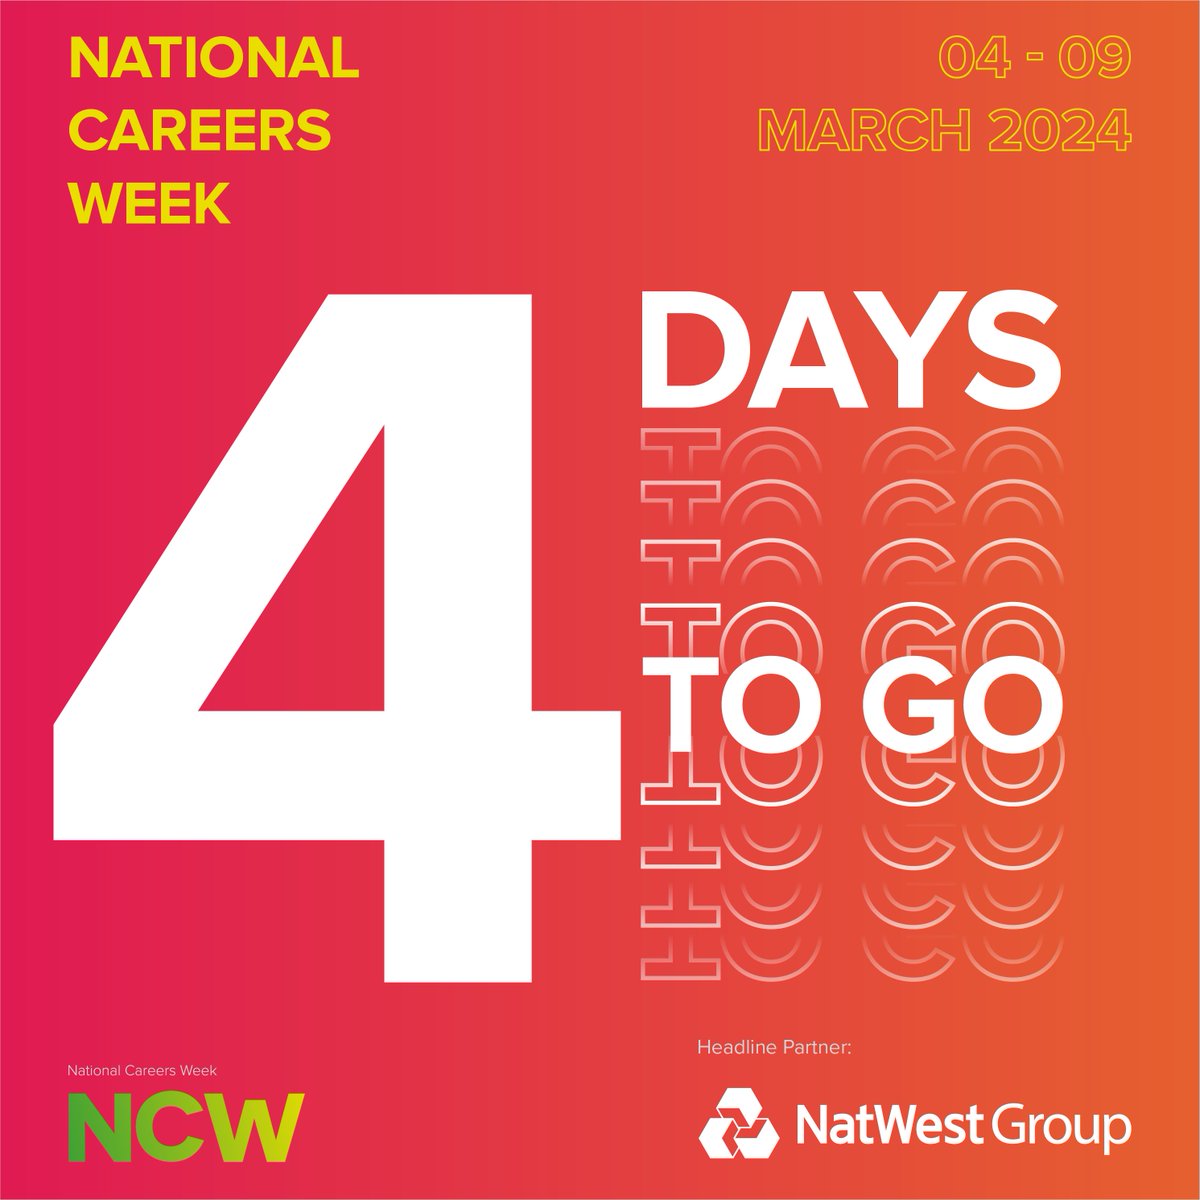 Next week is National Careers Week. Information will be shared with students via google classroom but parents/carers may also want to check the #NCW2024 tag on social media which will have information to help promote positive discussions around careers learning. #futures